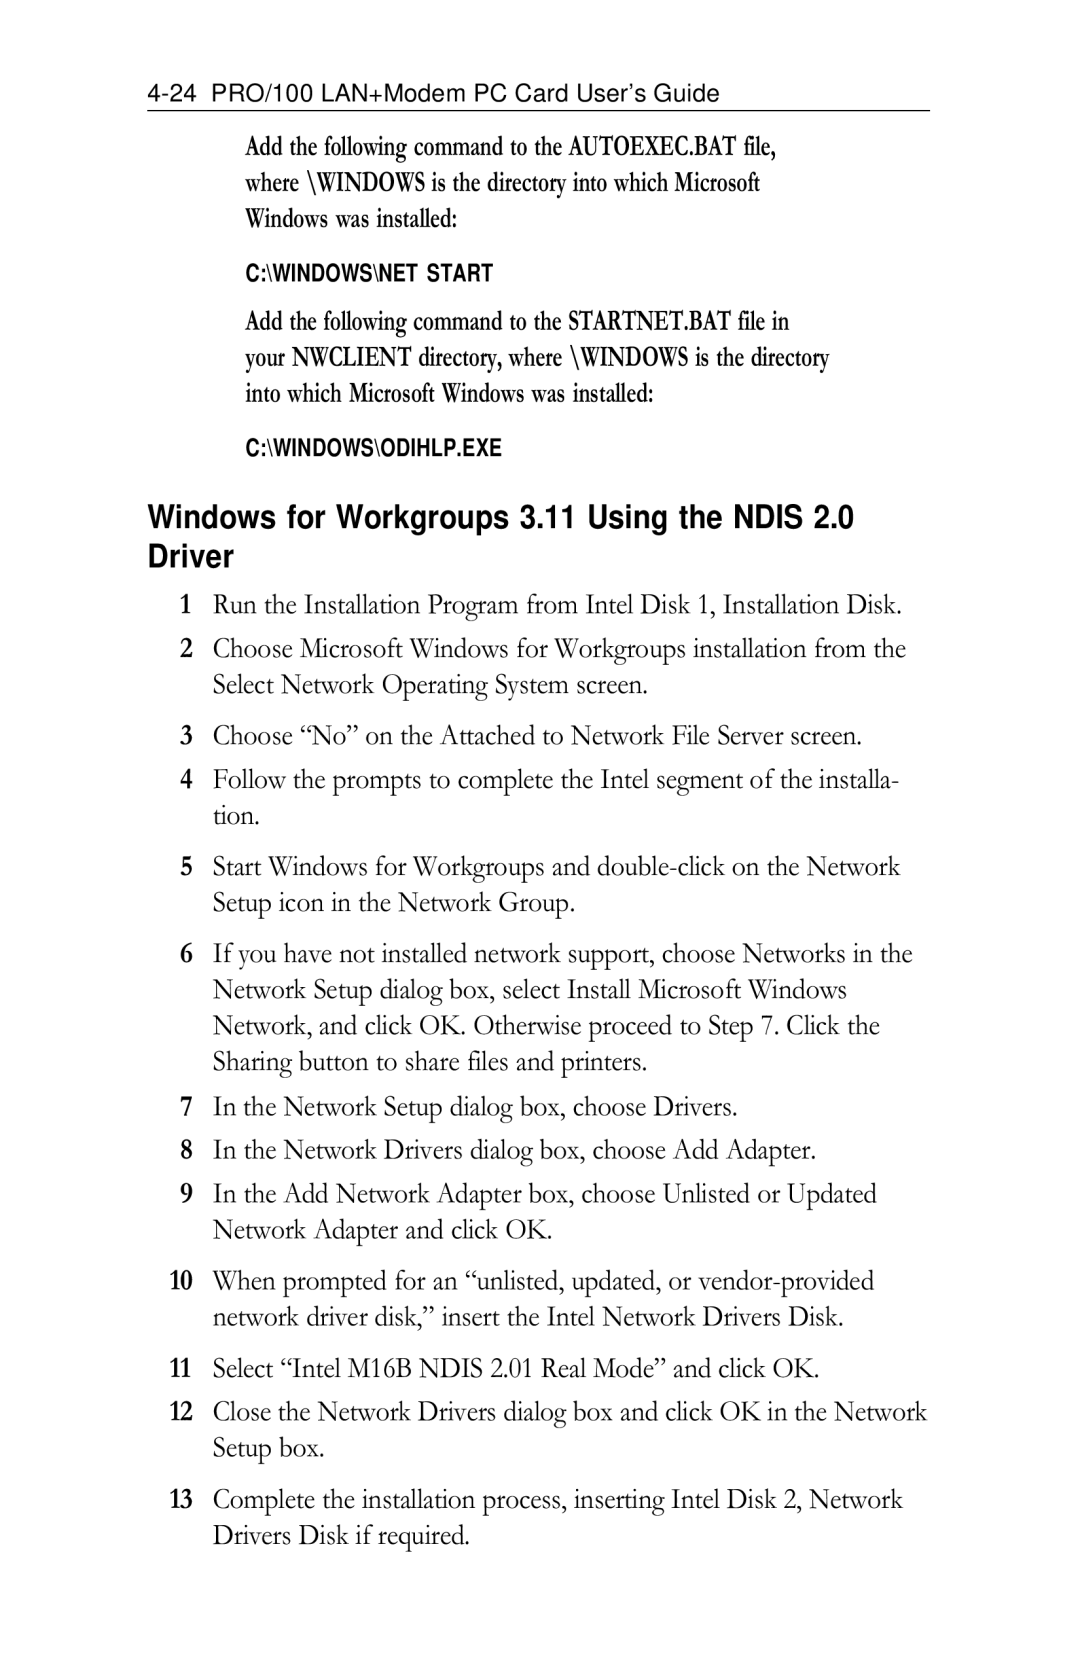 Intel appendix Windows for Workgroups 3.11 Using the Ndis 2.0 Driver, 24 PRO/100 LAN+Modem PC Card User’s Guide 